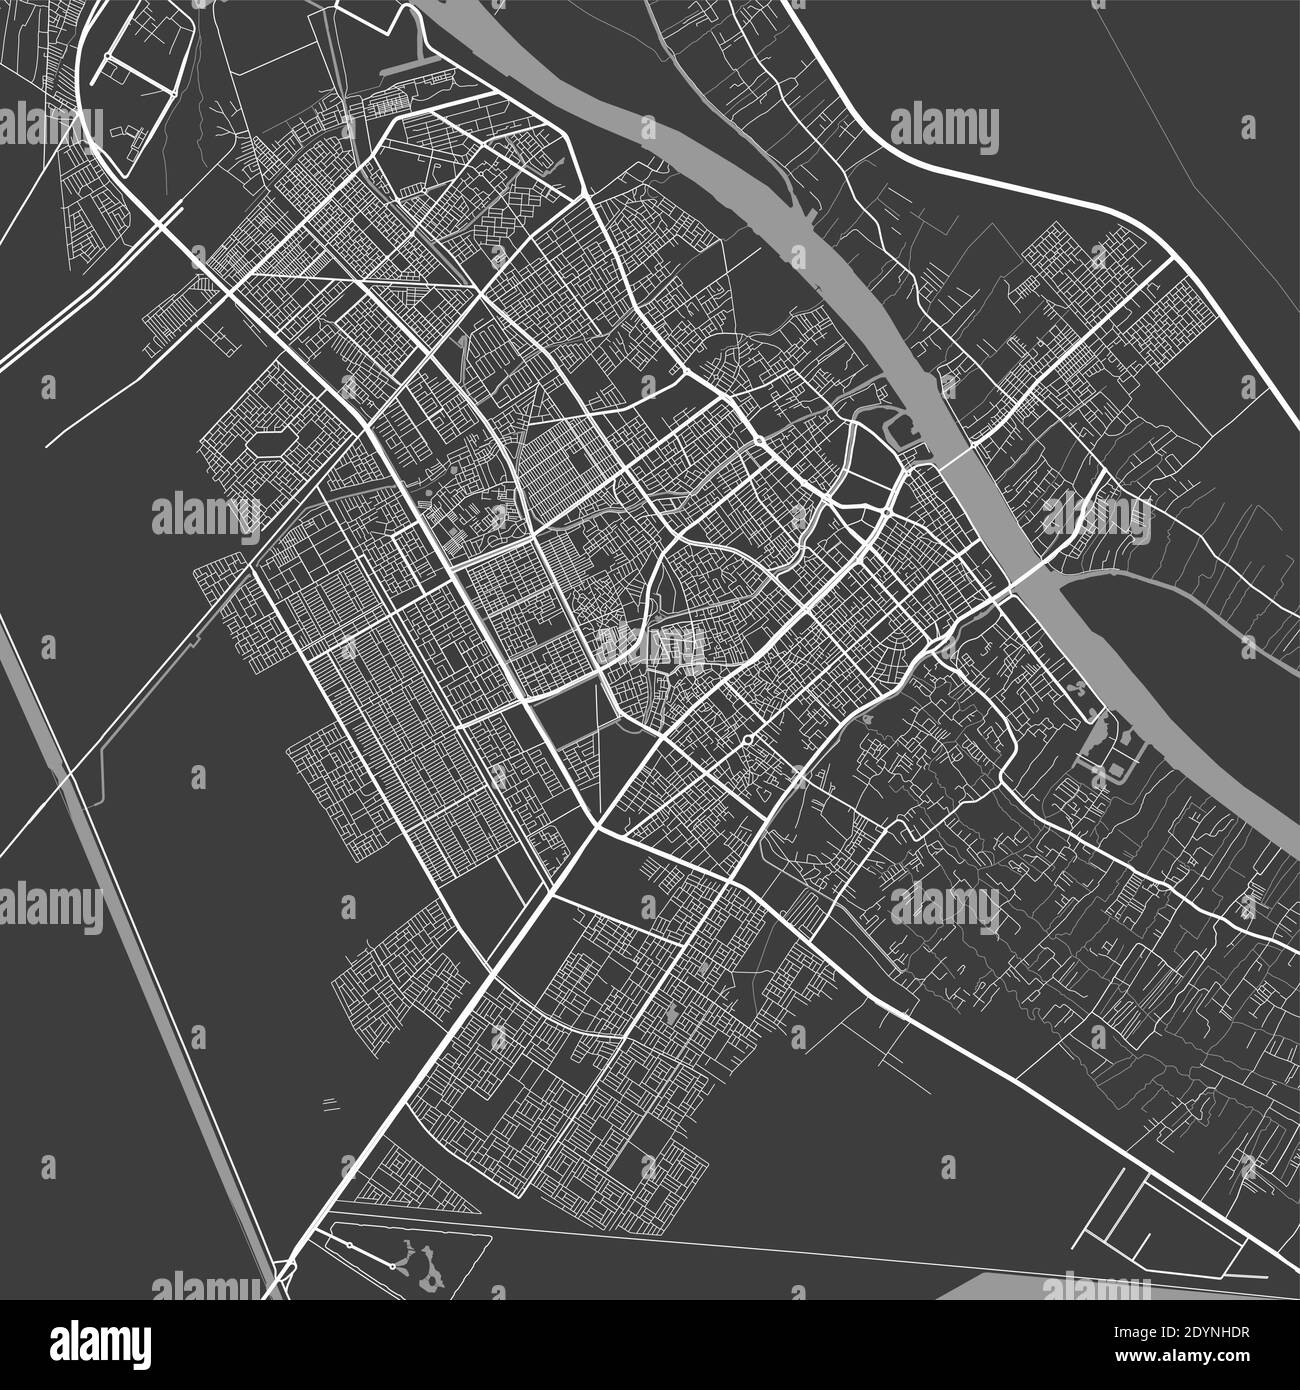 Urban city map of Basra. Vector illustration, Basra map grayscale art poster. Street map image with roads, metropolitan city area view. Stock Vector